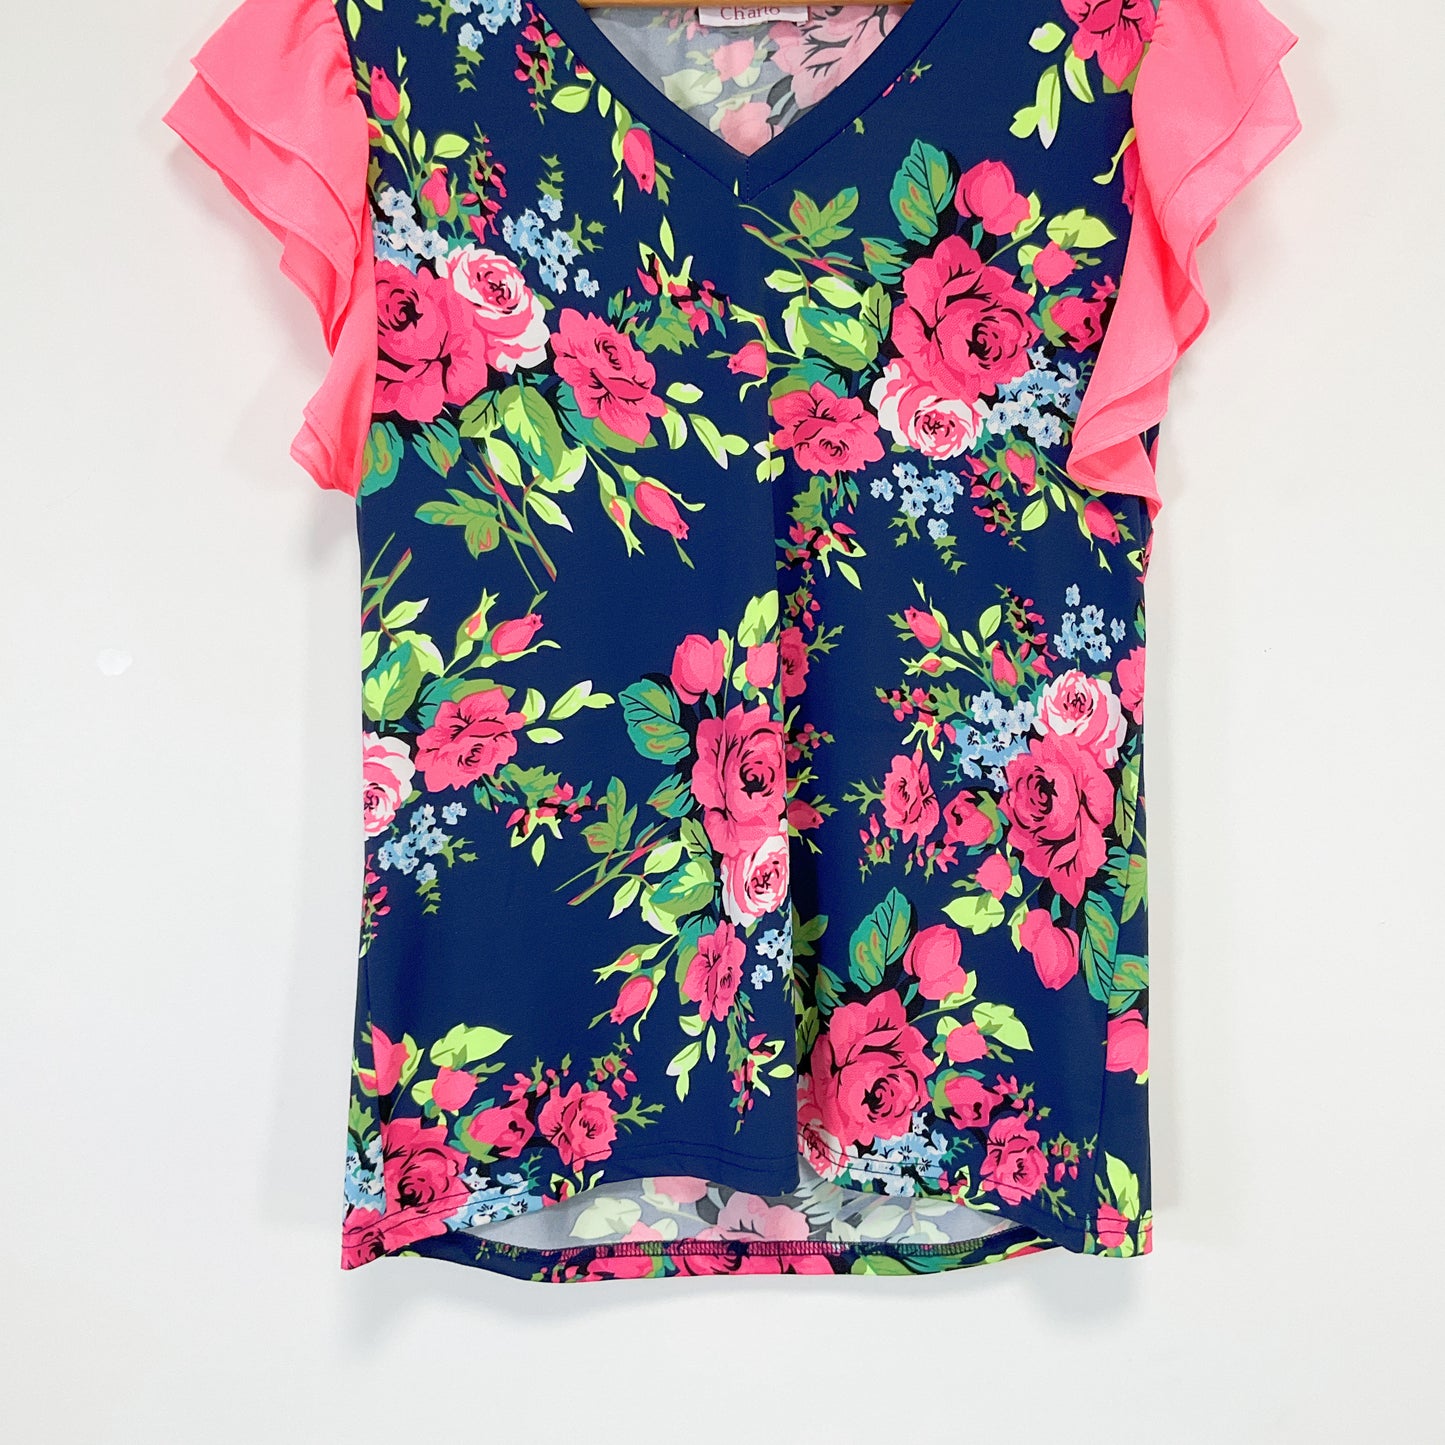 Charlo - Floral women's top